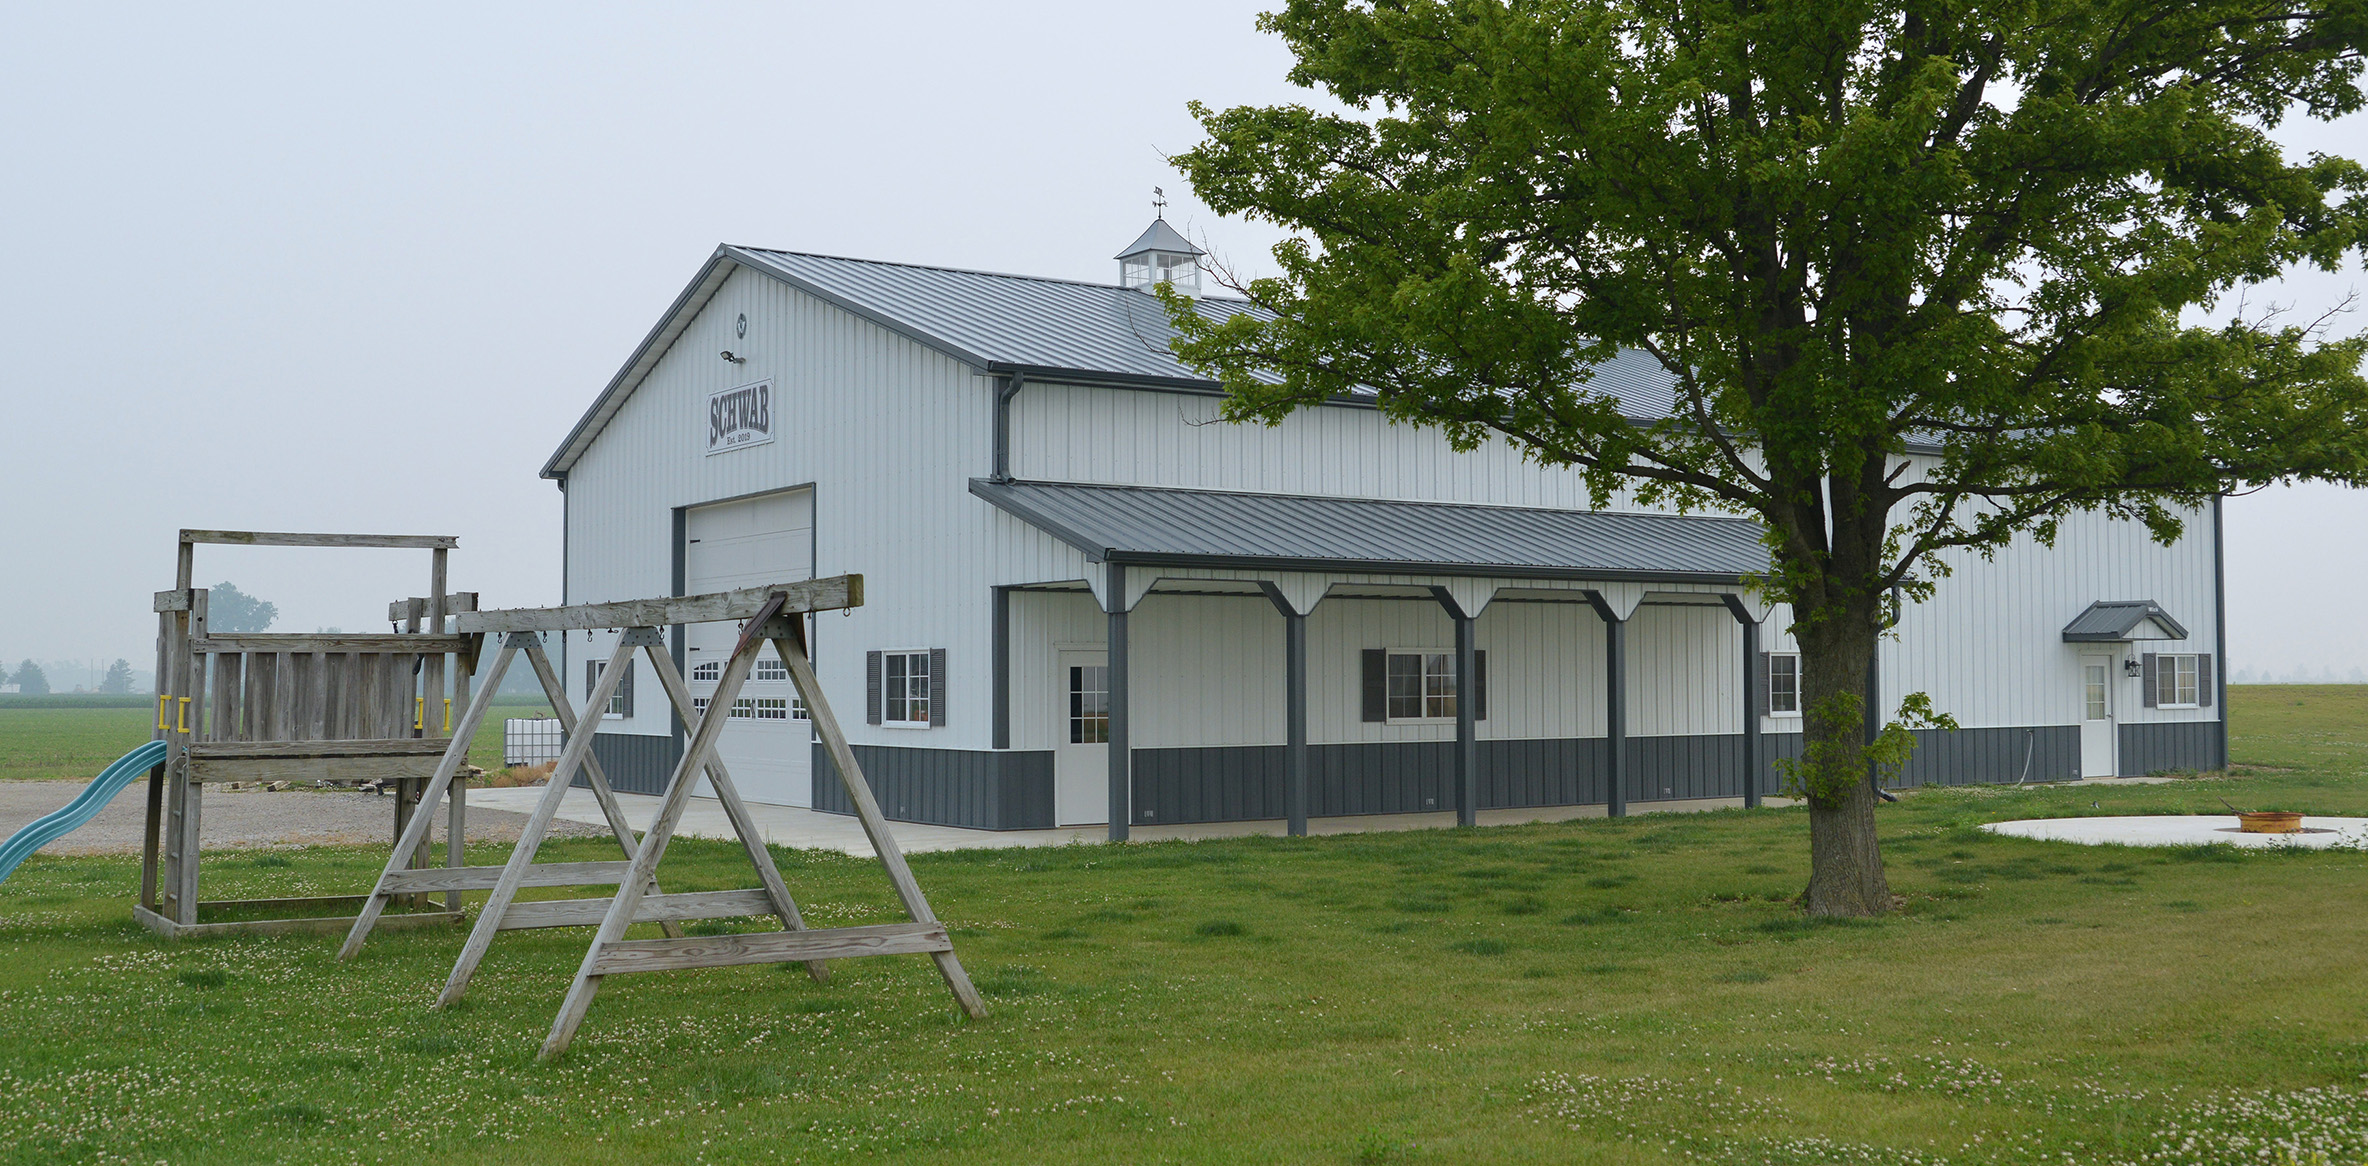 Gray and white post frame suburban building with a tree and small playground in the yard